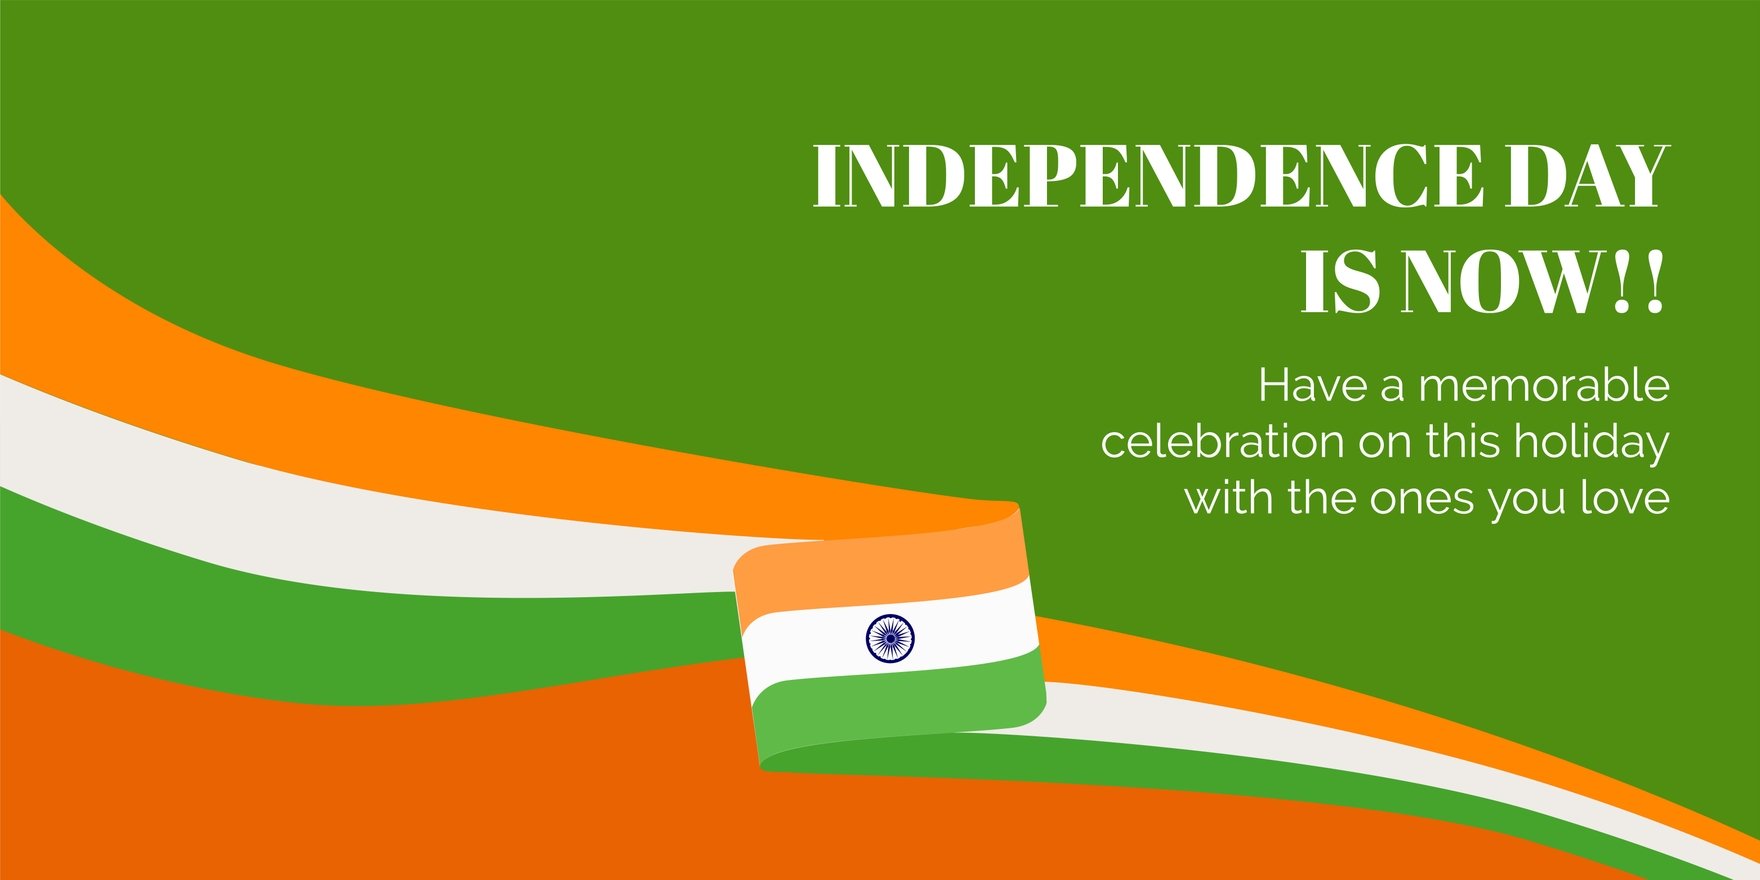 Free India Independence Day Flag Banner in Word, Google Docs, Illustrator, PSD, Apple Pages, Publisher